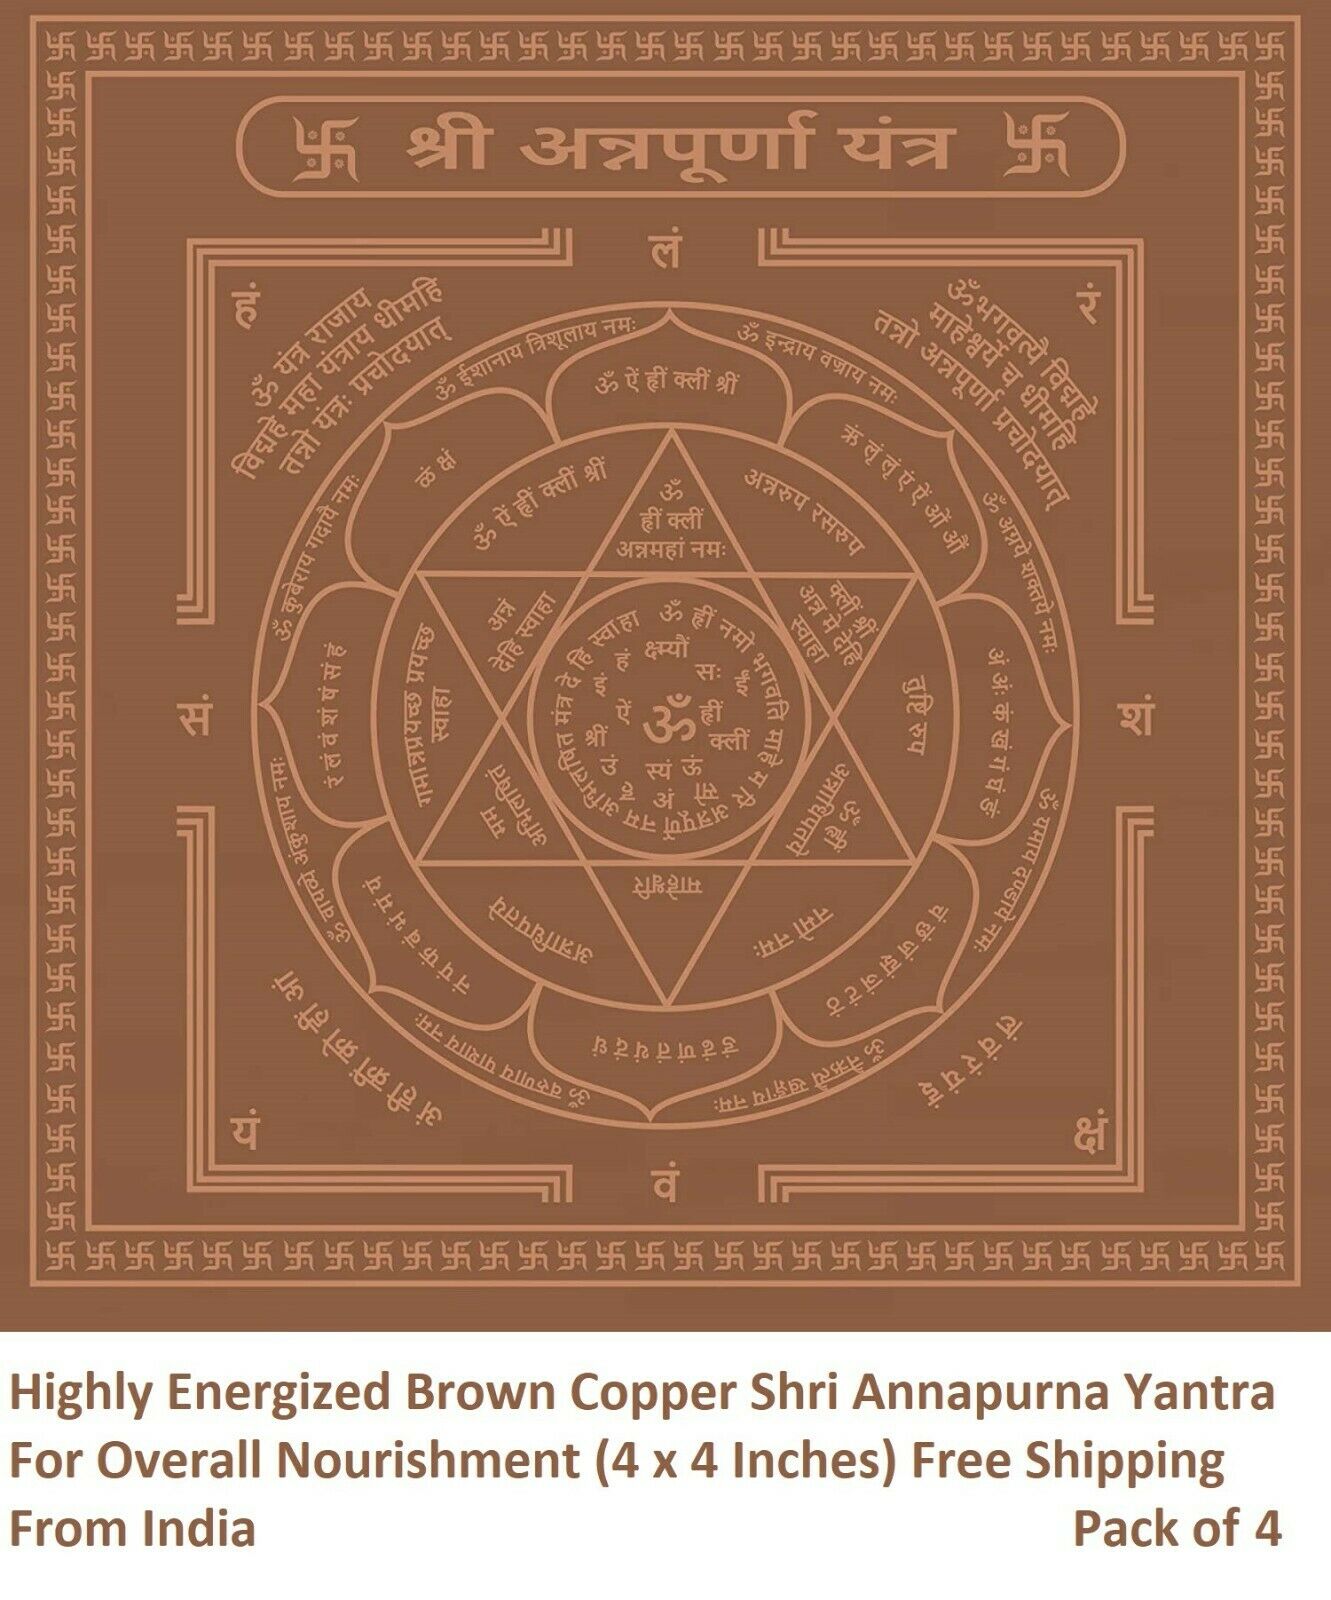 4 X Highly Energized Brown Copper Shri Annapurna Yantra For Overall Nourishment